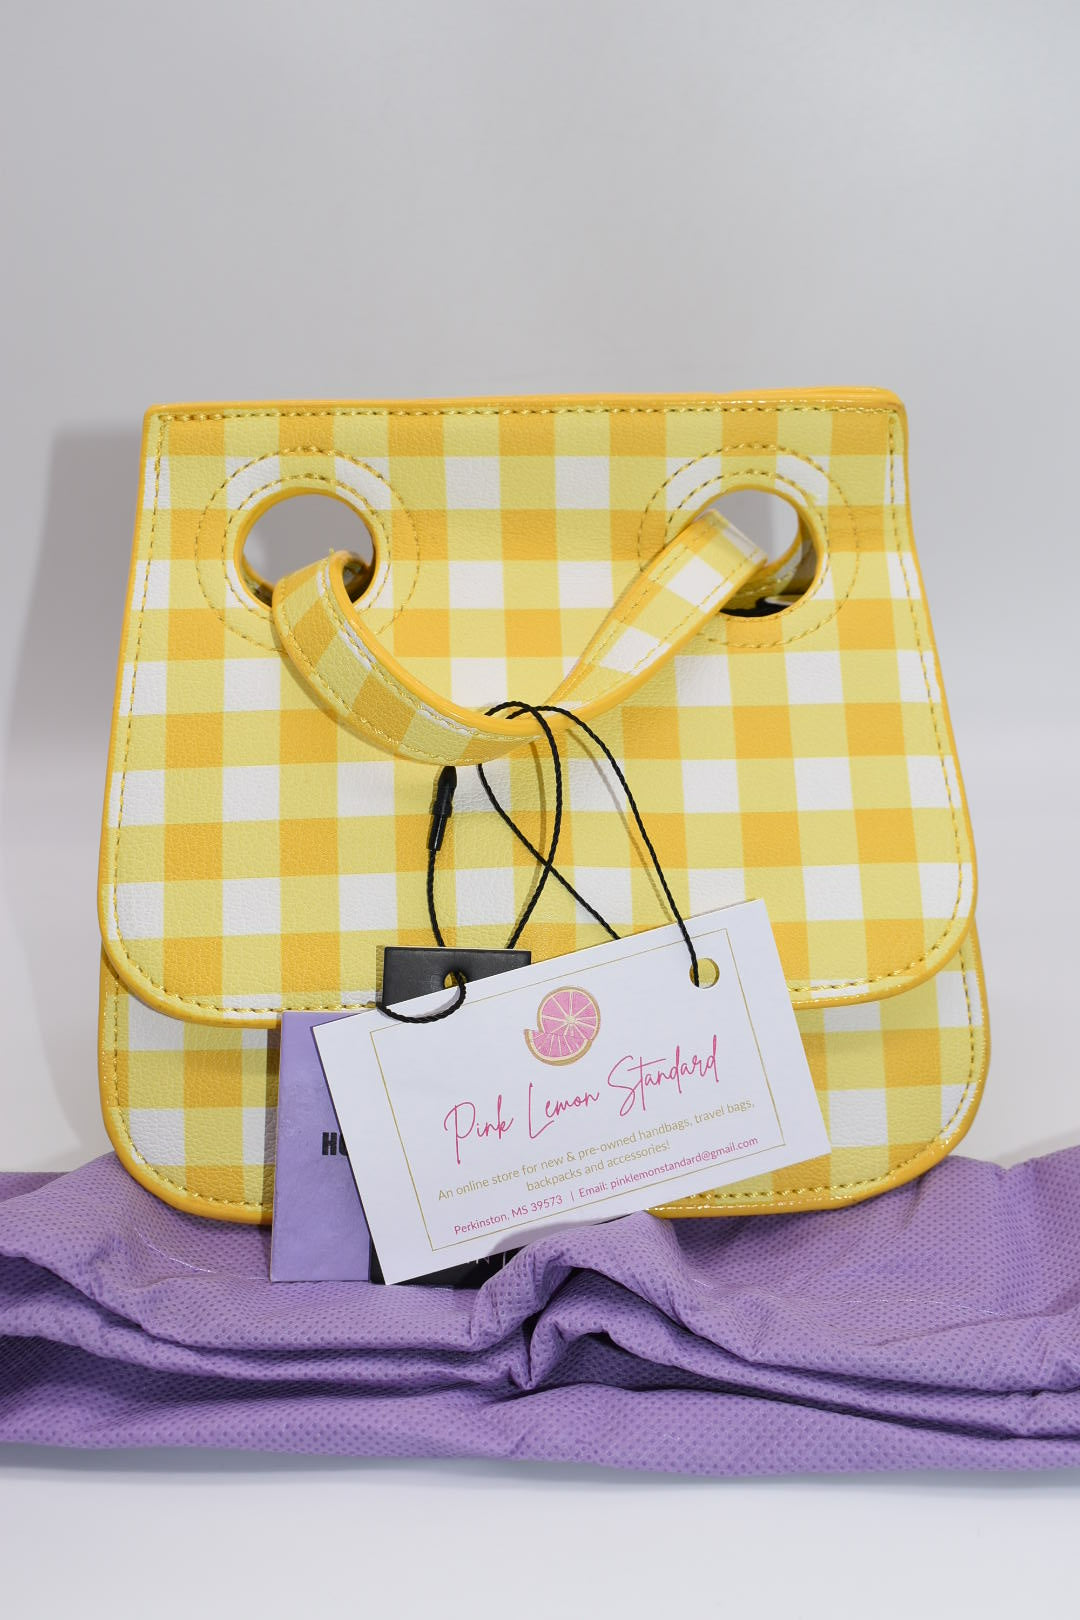 HOUSE OF WANT We Are Original Shoulder Bag in Yellow Gingham